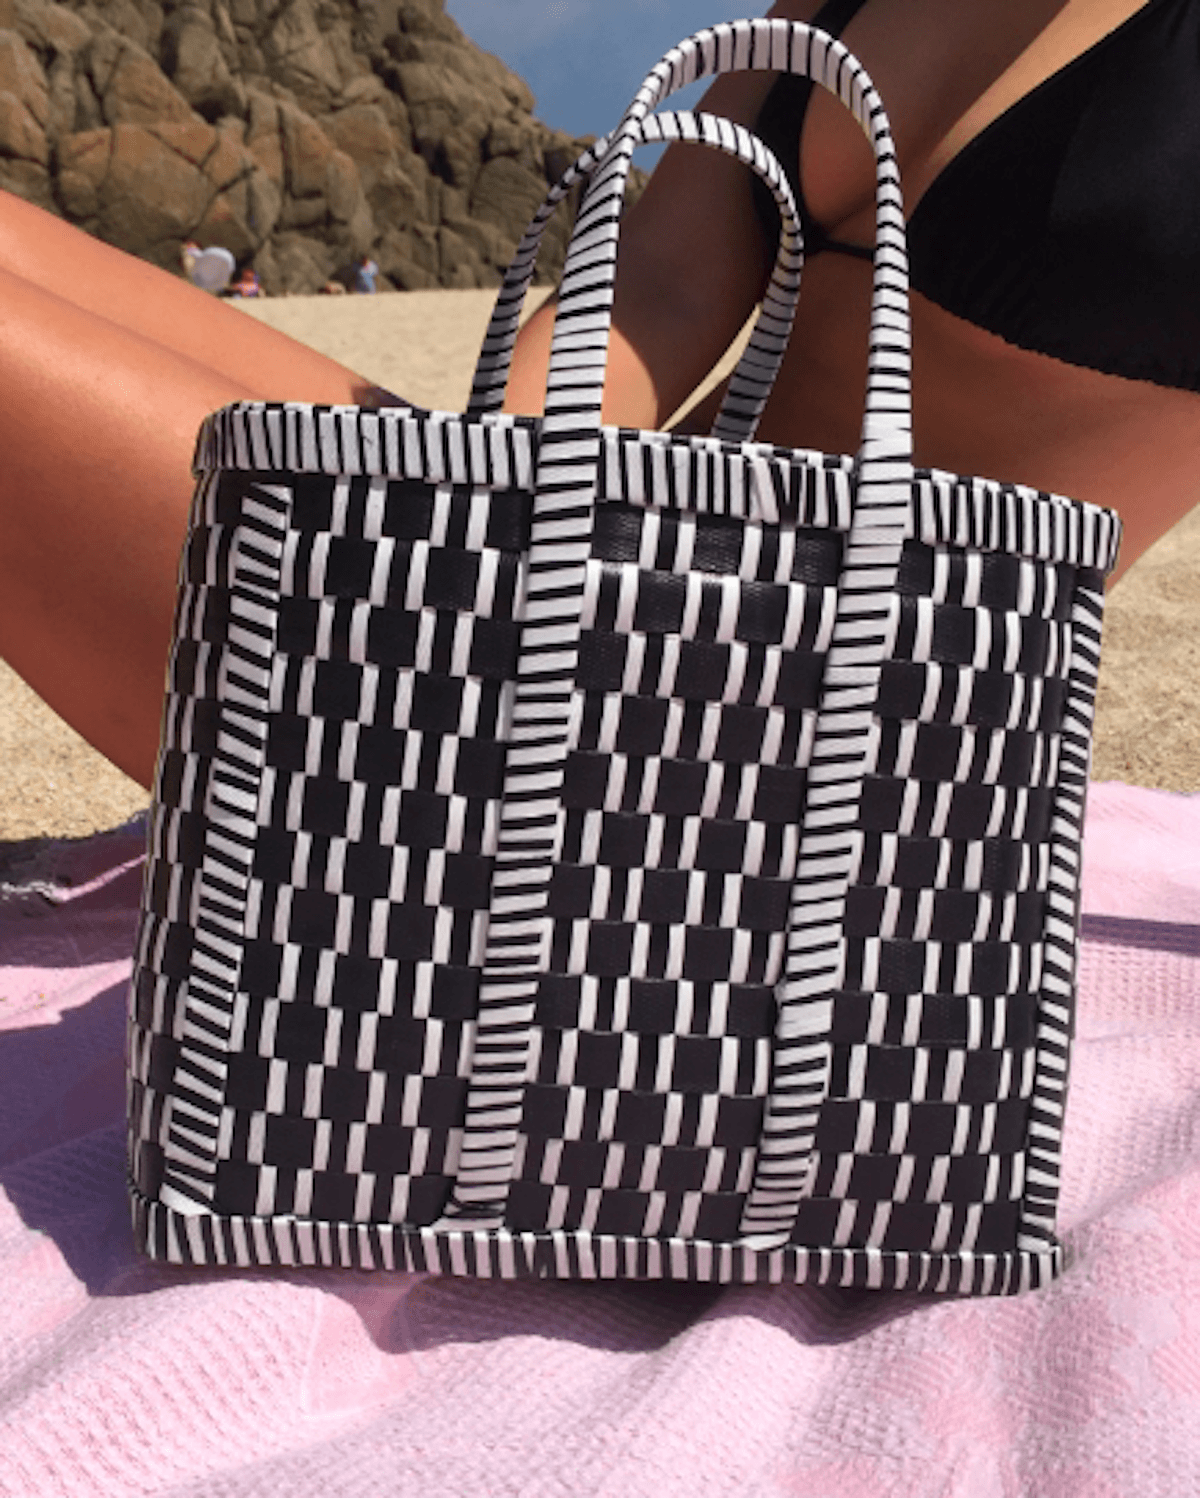 Reverse Black and White Woven Basket | Upcycled Handwoven Shopper Bag | Beach Basket - YGN Collective